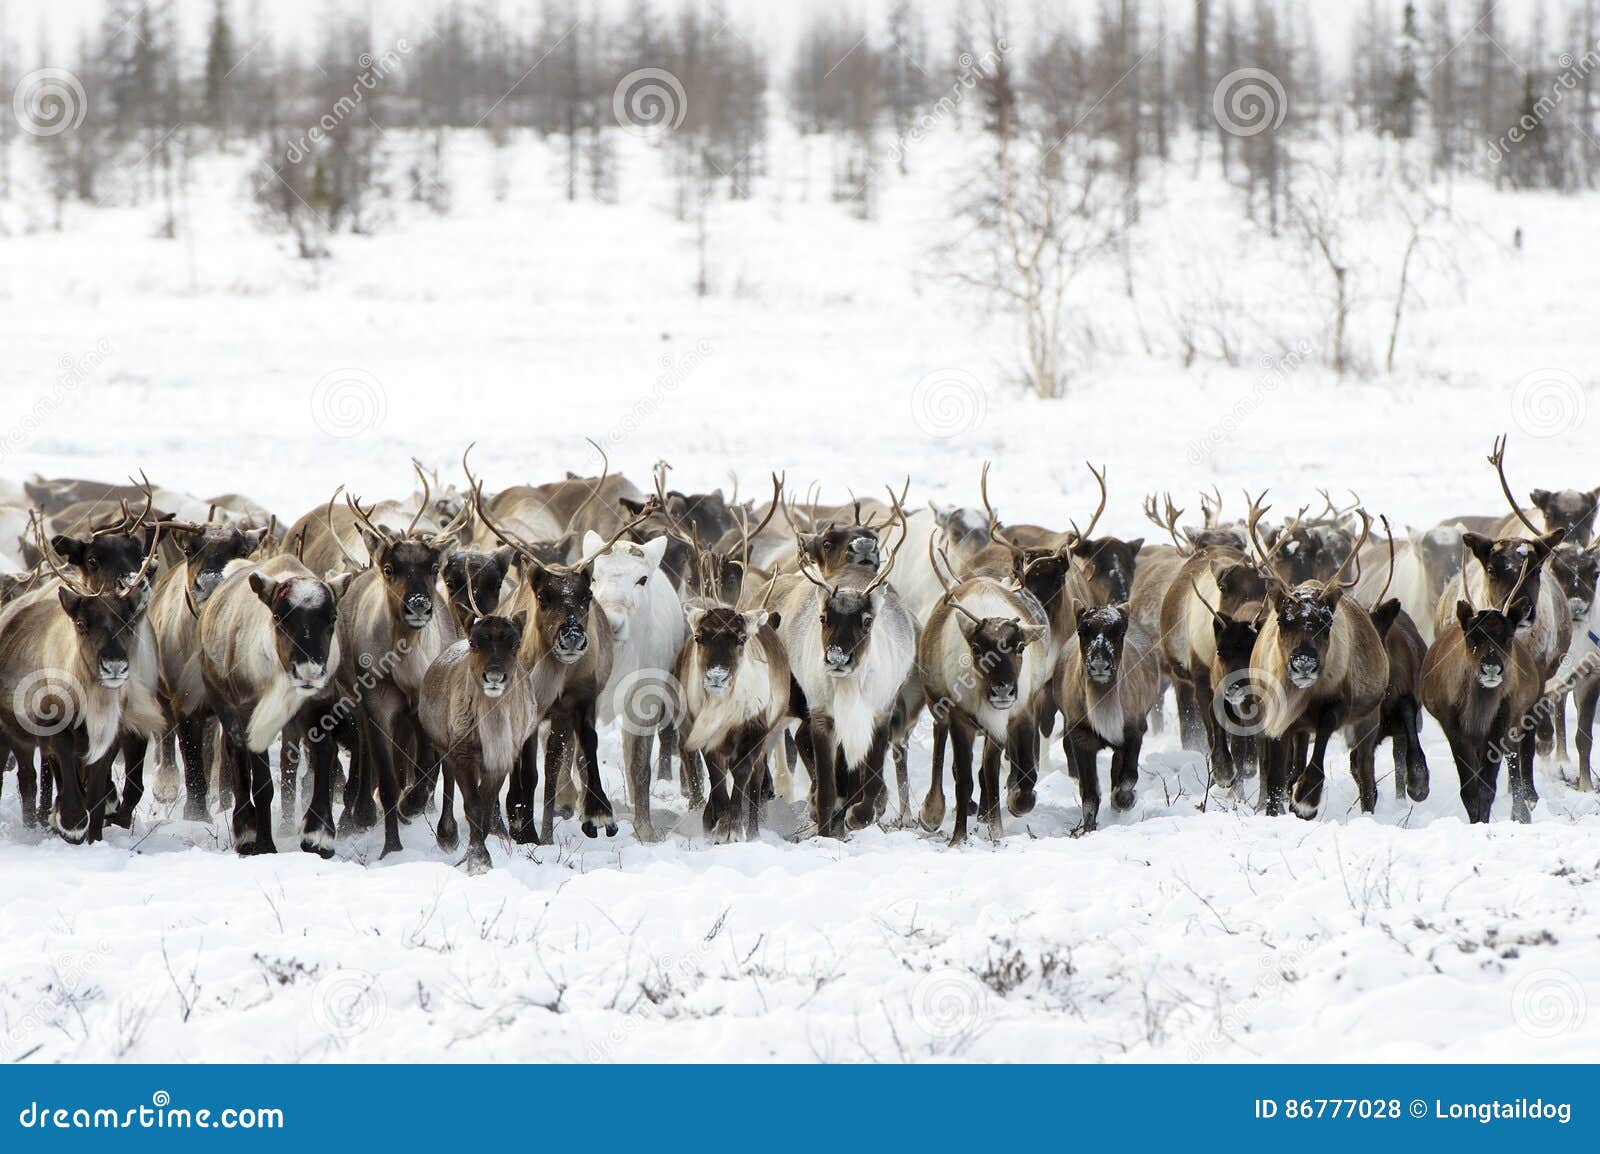 reindeers migrate for a best grazing in the tundra